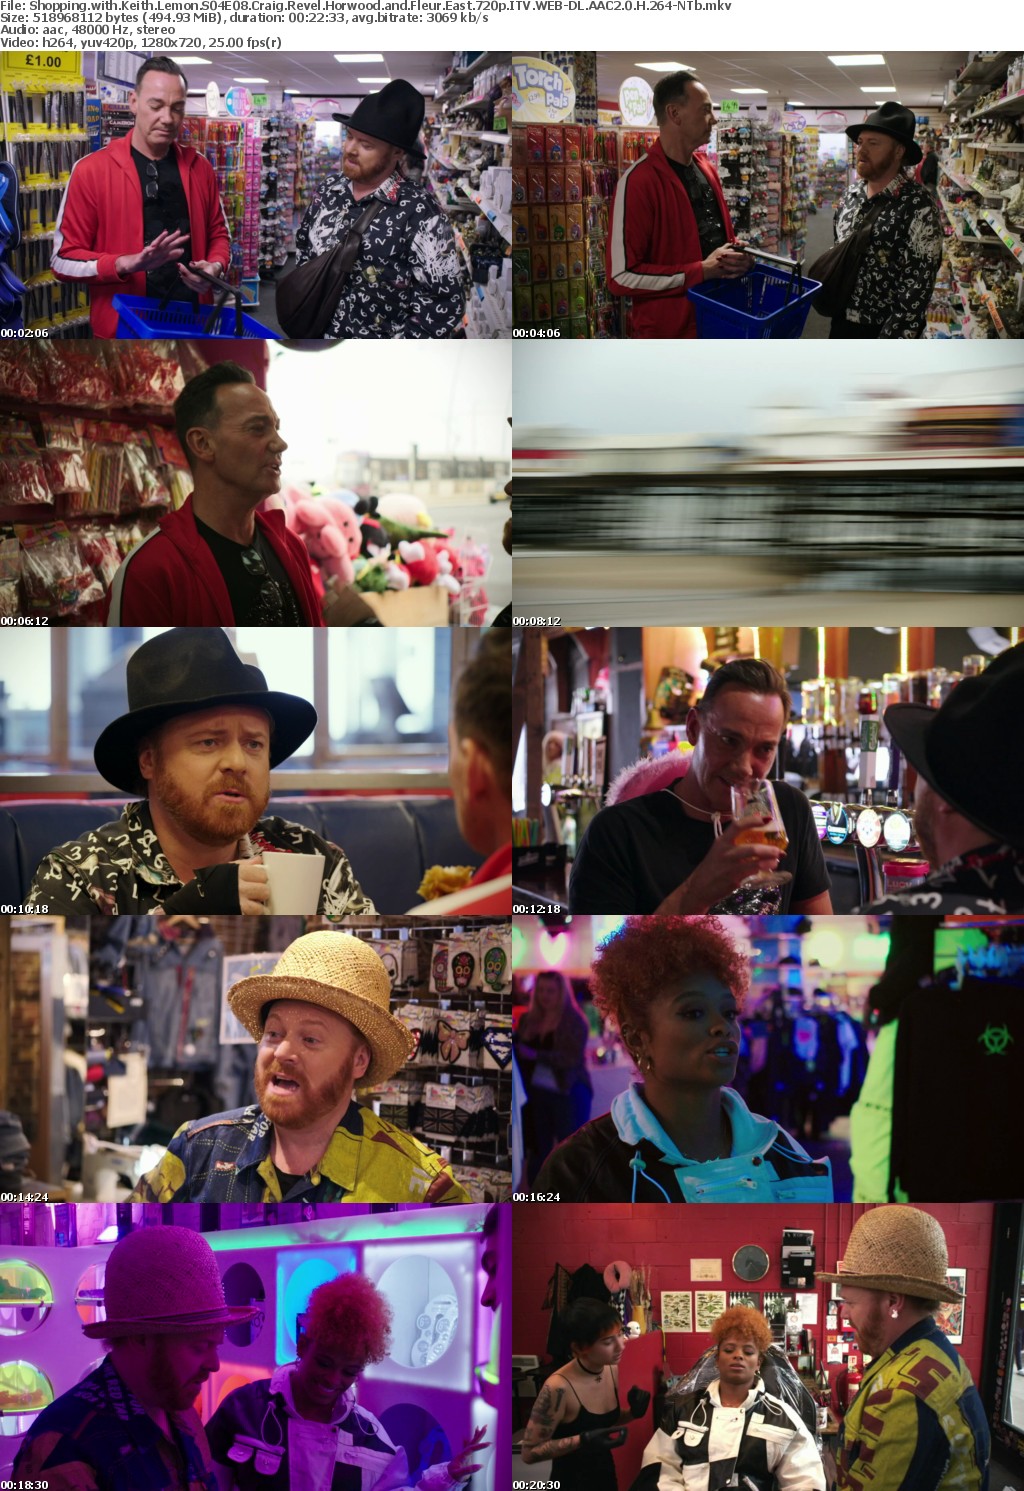 Shopping with Keith Lemon S04E08 Craig Revel Horwood and Fleur East 720p ITV WEB-DL AAC2 0 H 264-NTb